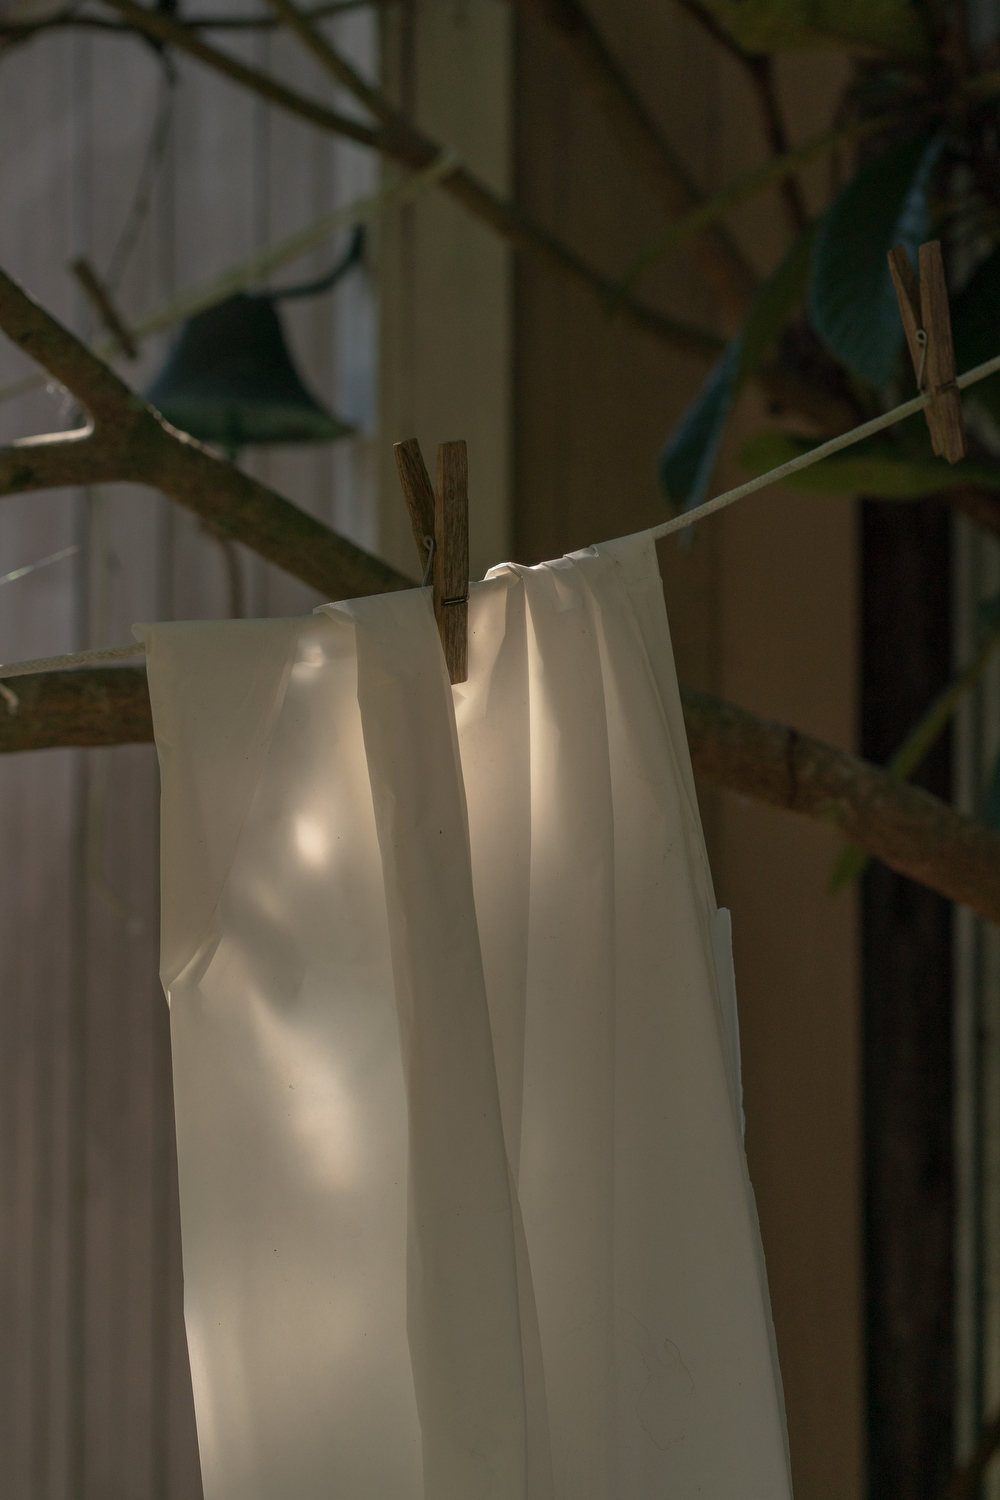 Fabric hanging on a clothesline before being dyed with indigo, on Wadmalaw Island, South Carolina.